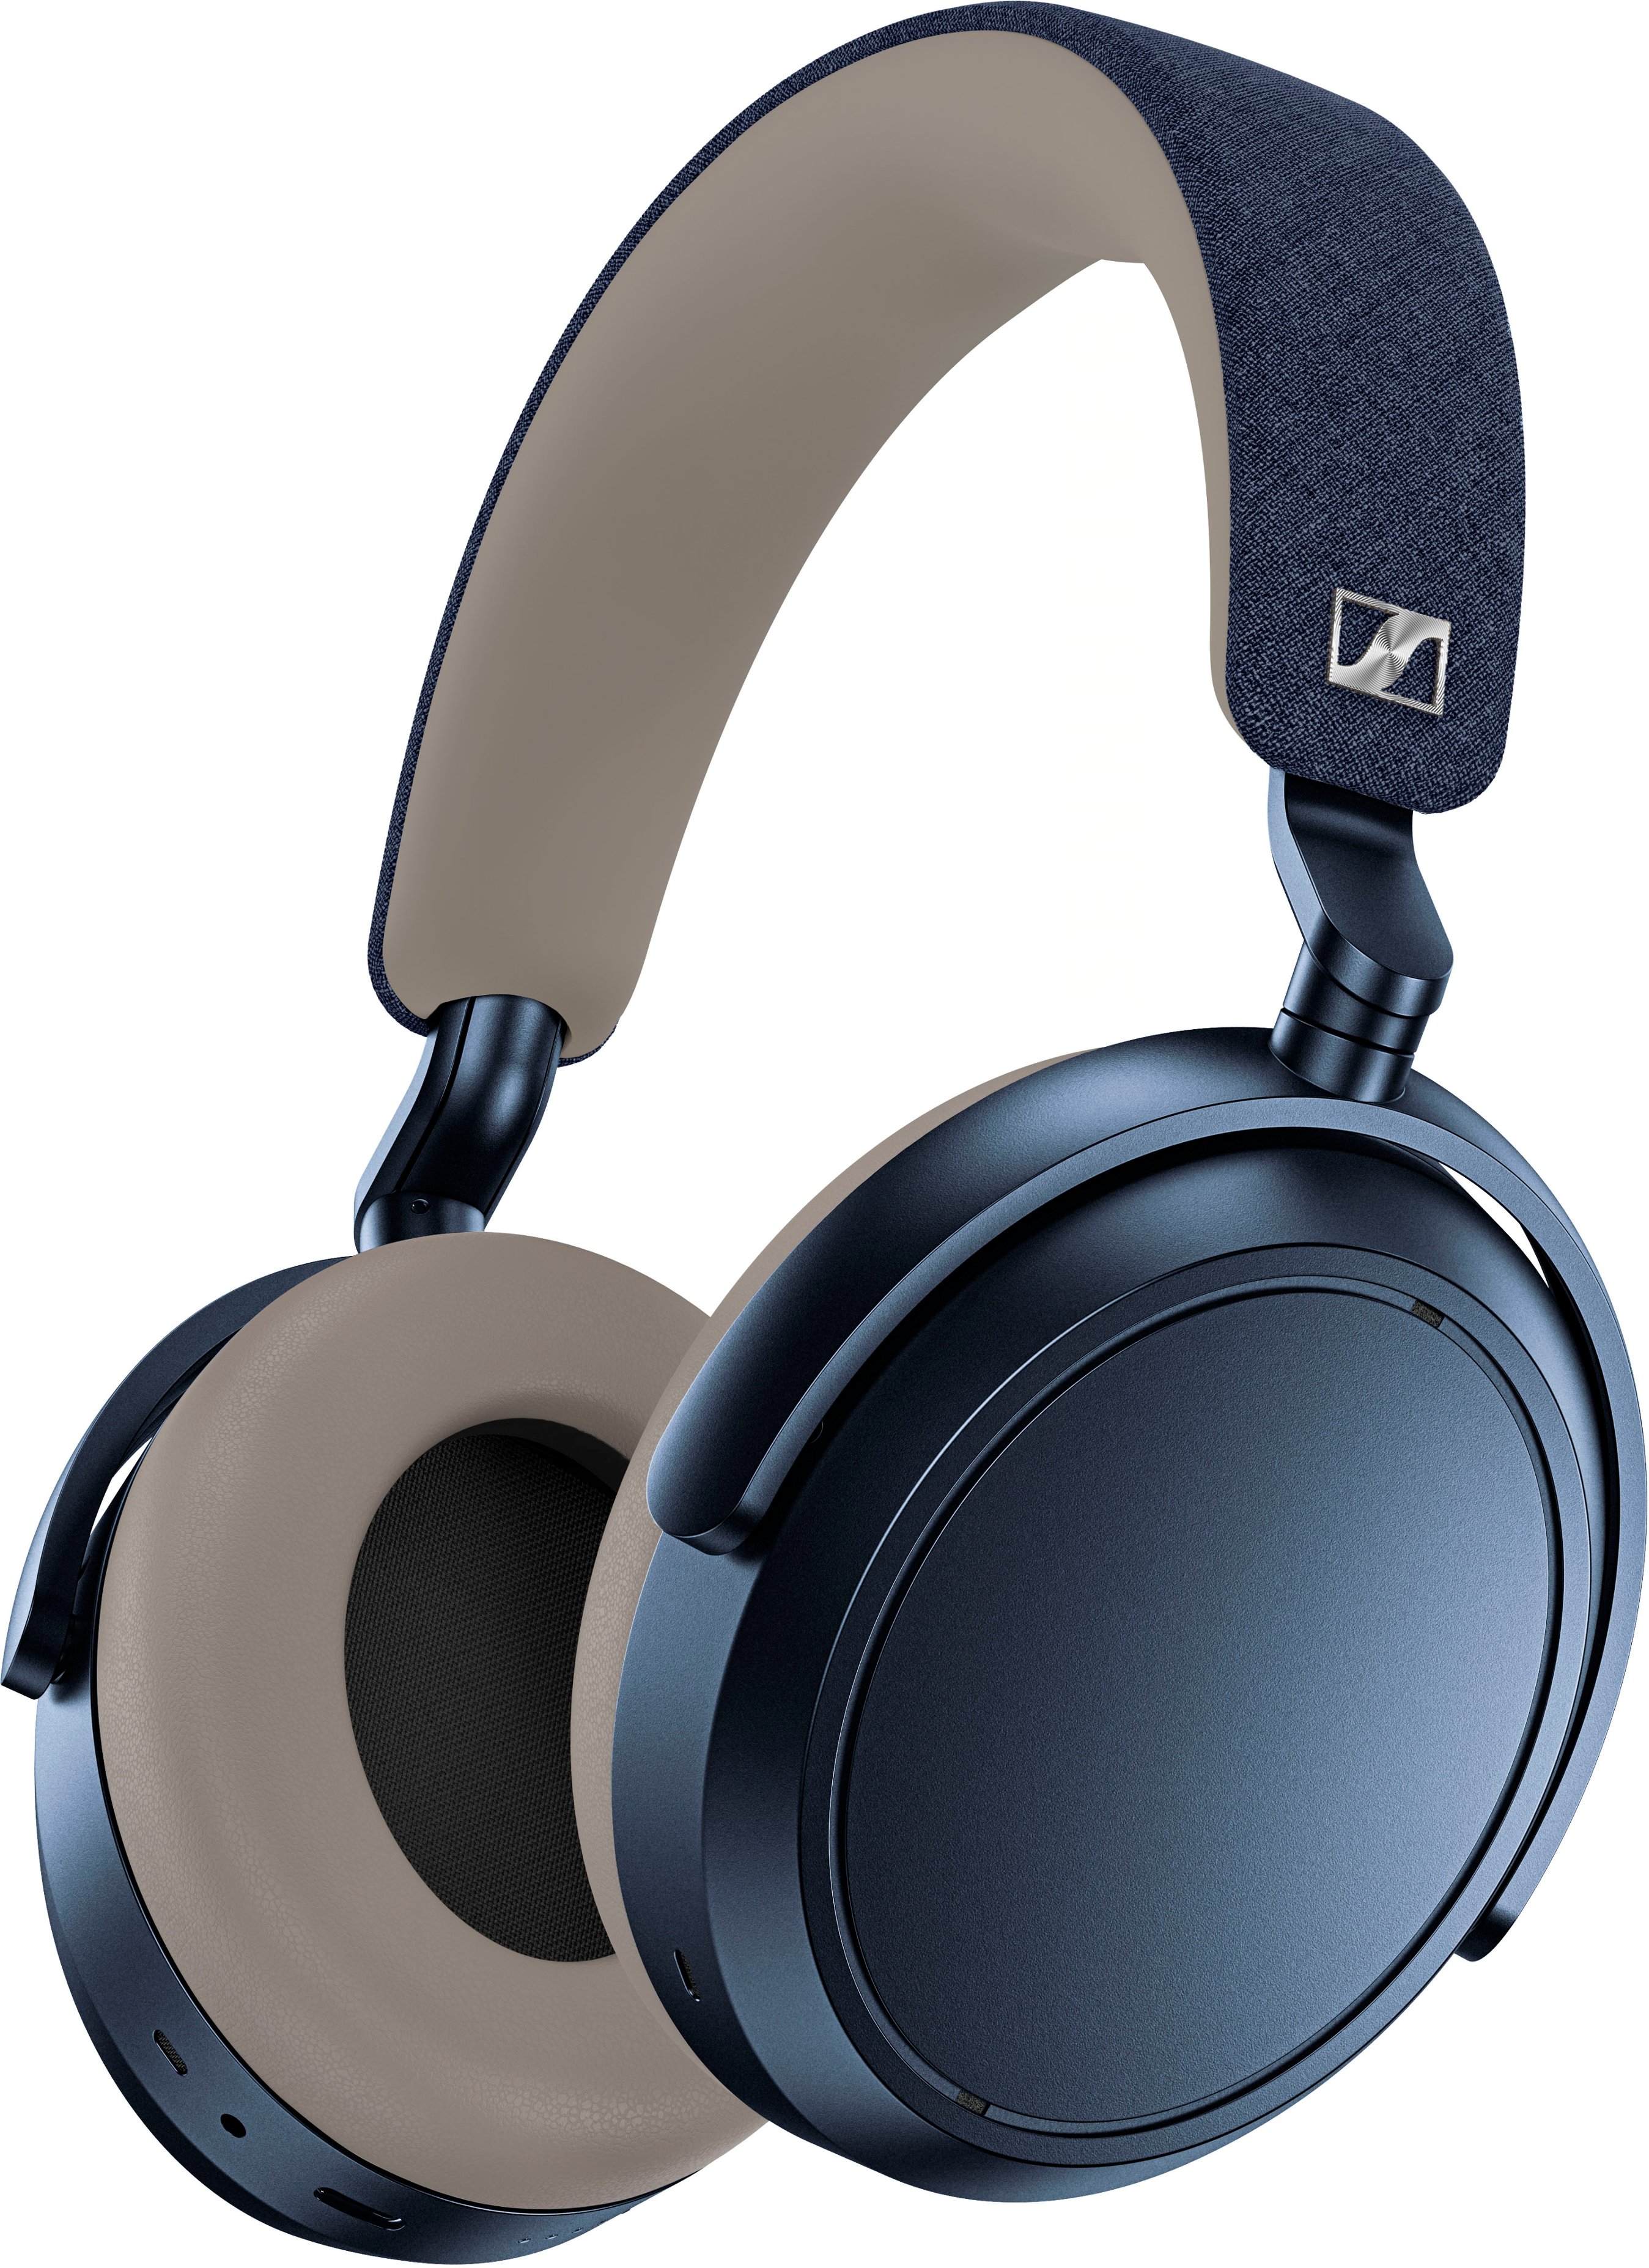 Sennheiser Momentum 4: Save $120 at Best Buy for a limited time